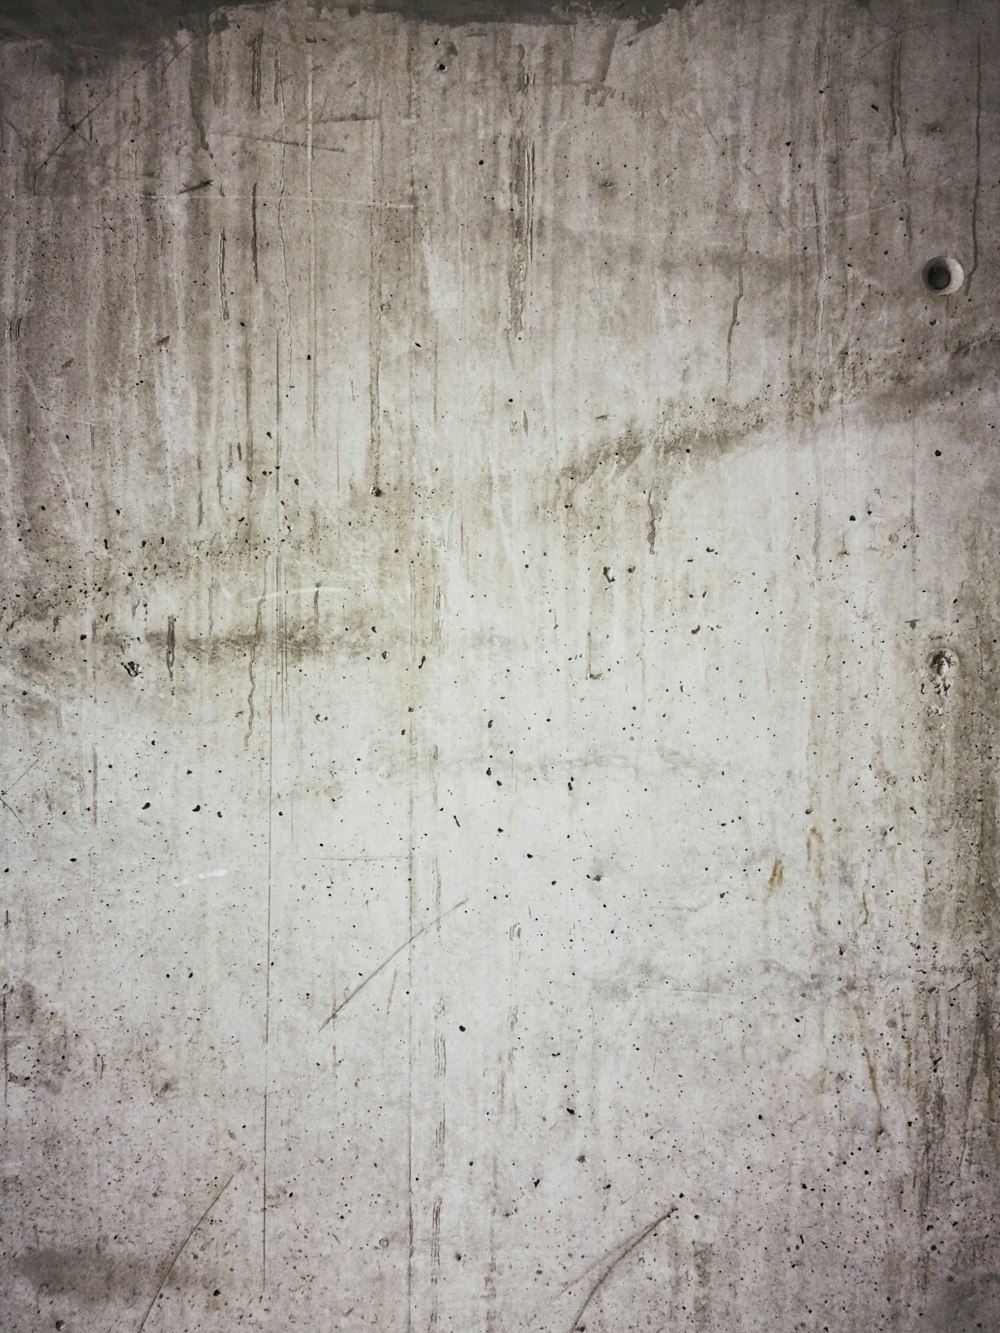 a white wall with some black dots on it